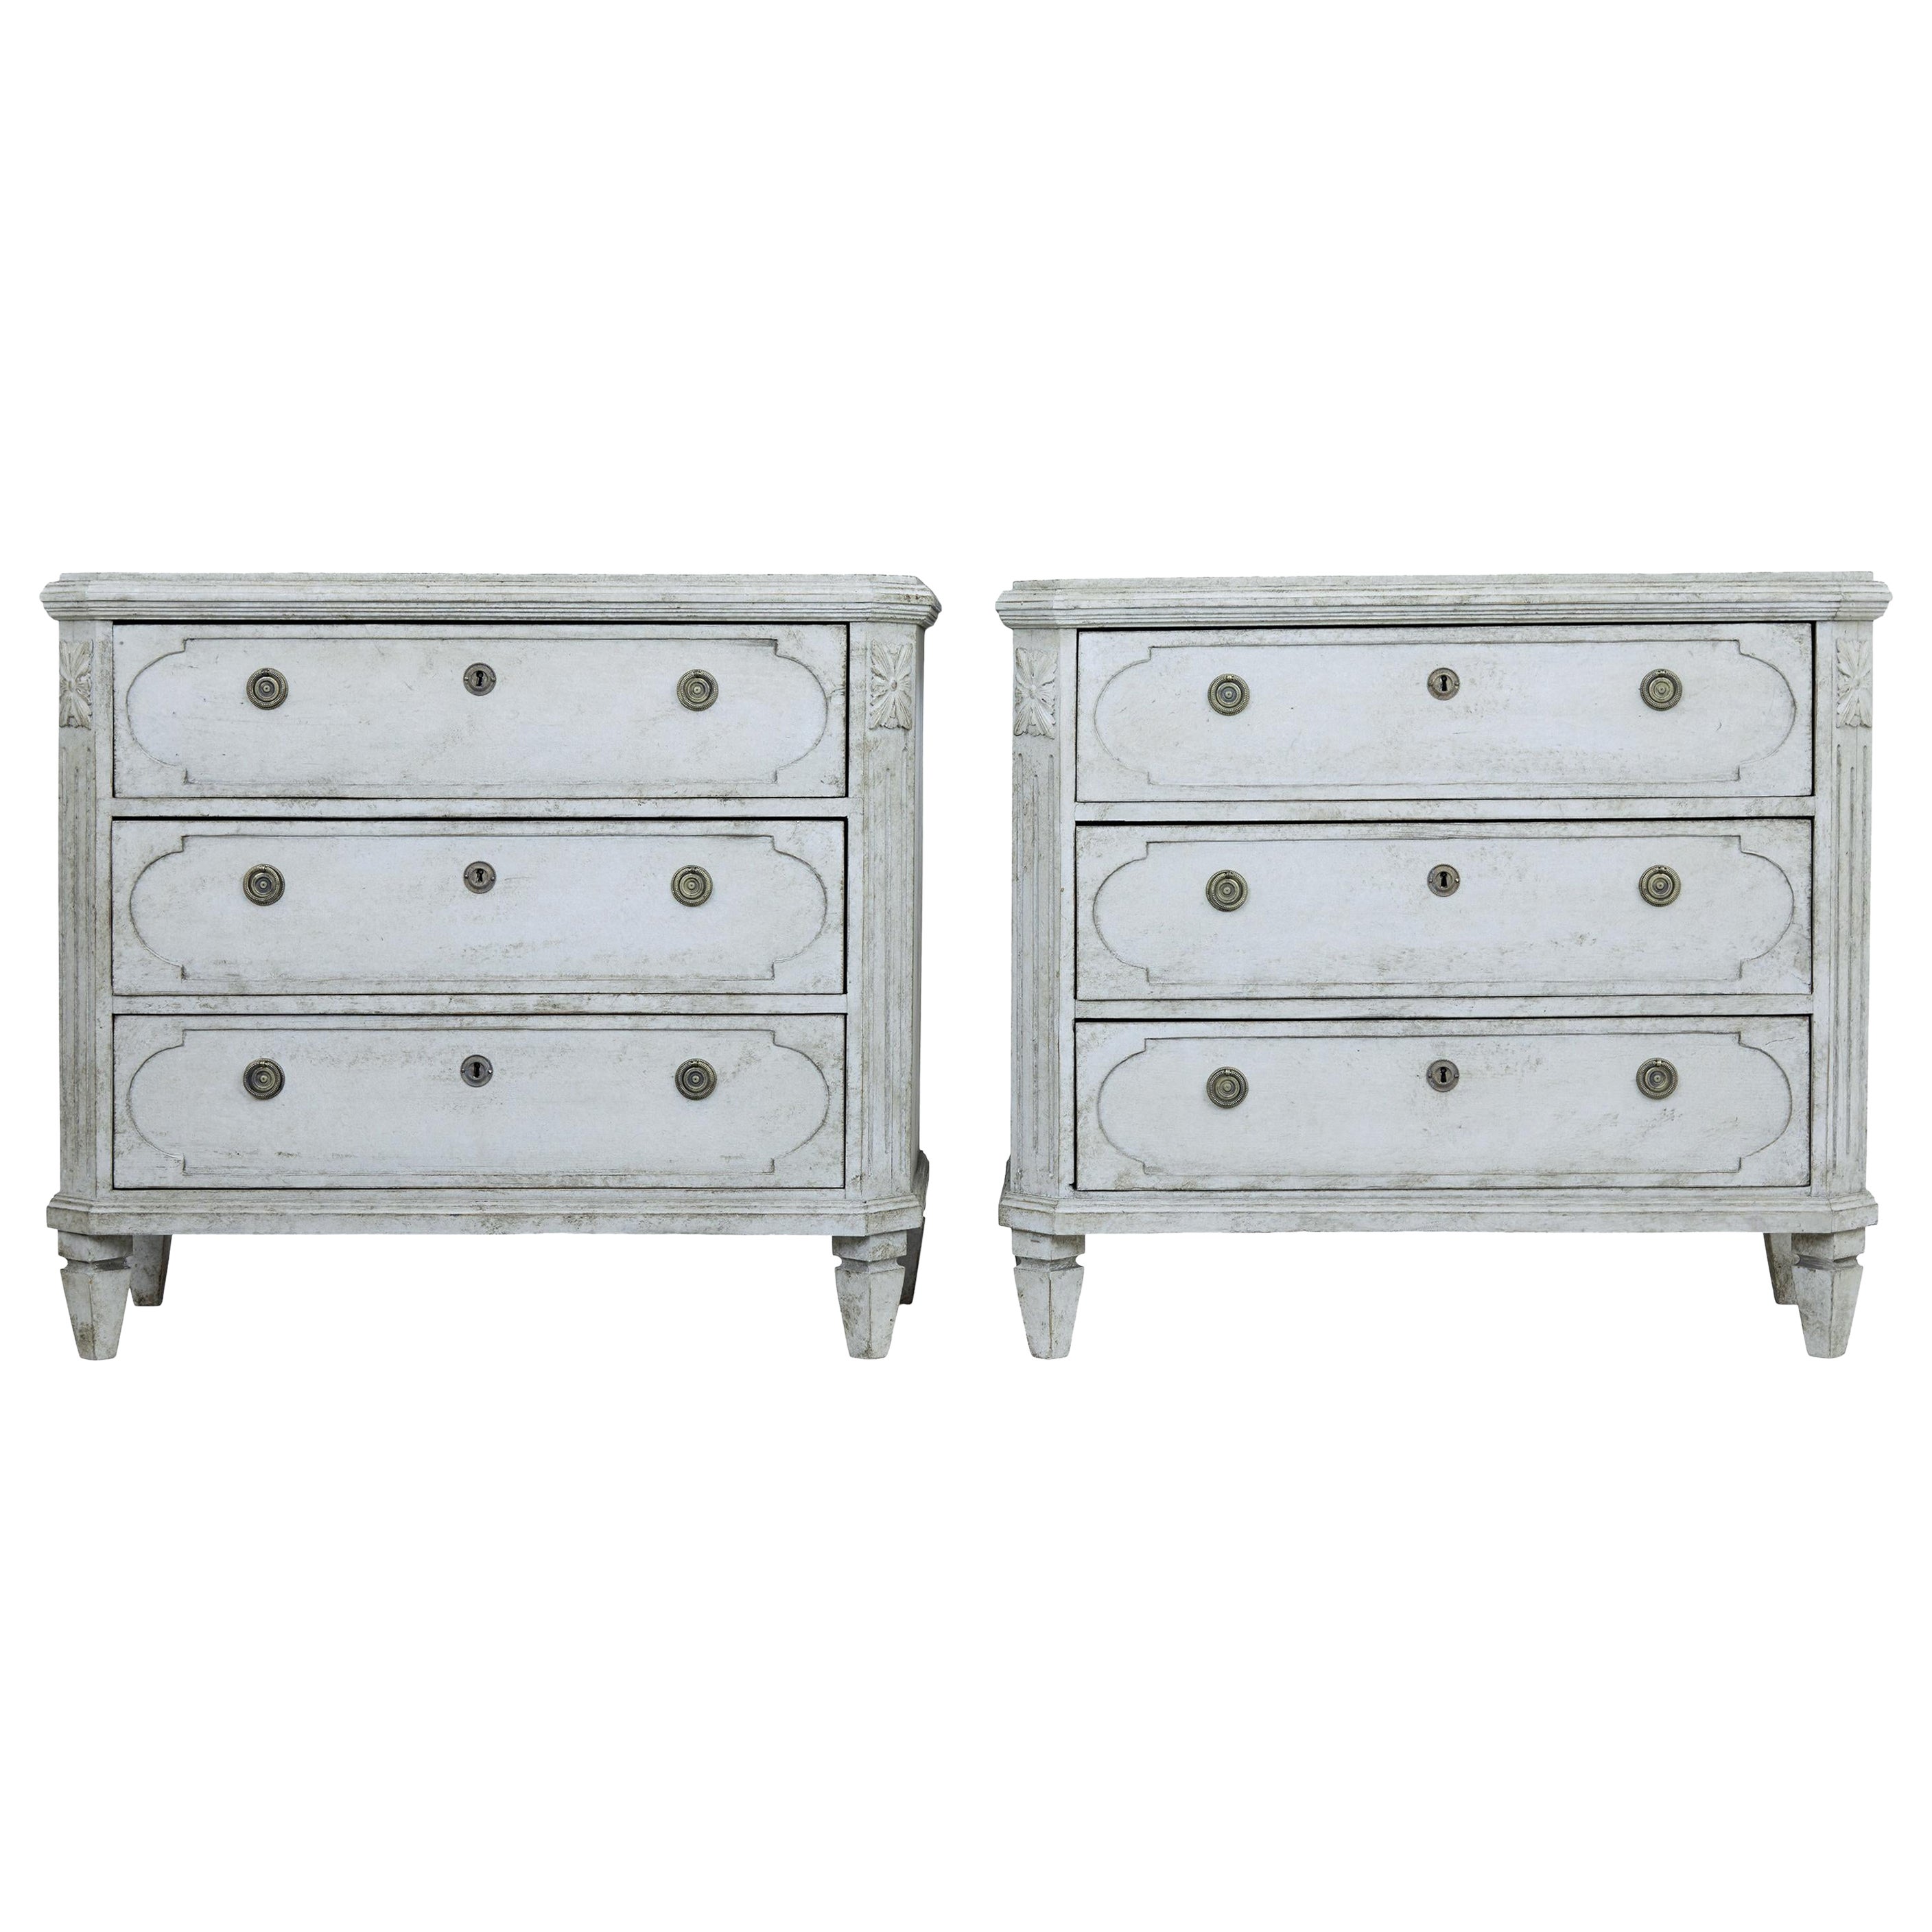 Fine Pair of 19th Century Swedish Painted Commodes